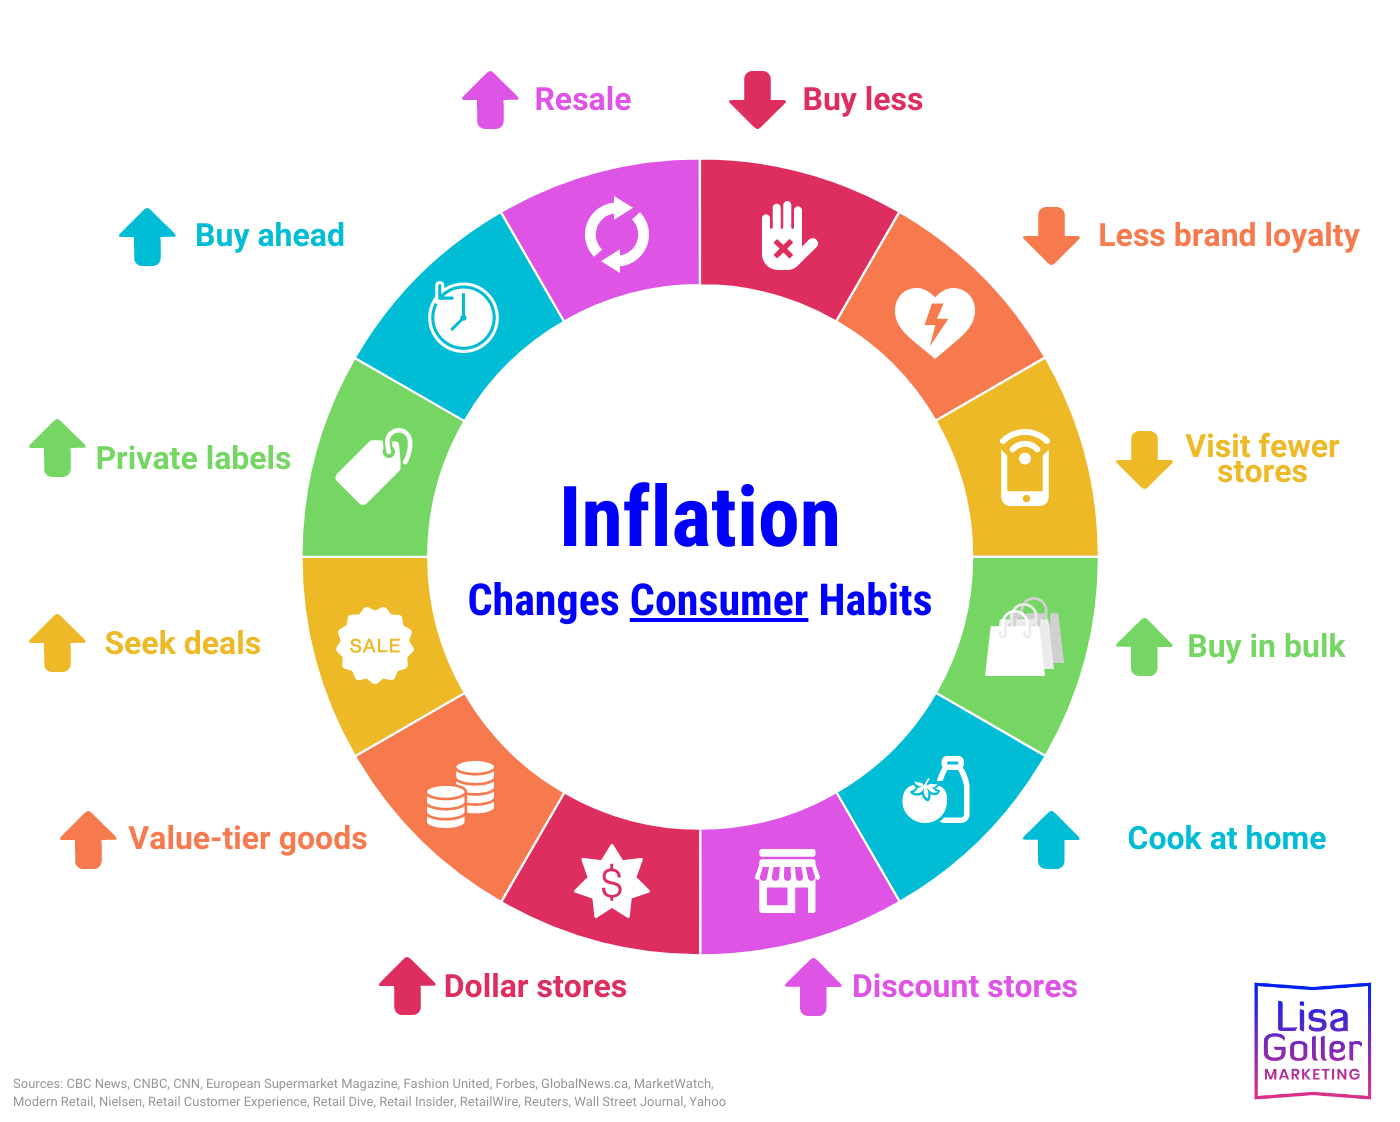 Inflation Changes Consumer Habits Lisa Goller Marketing B2B Content